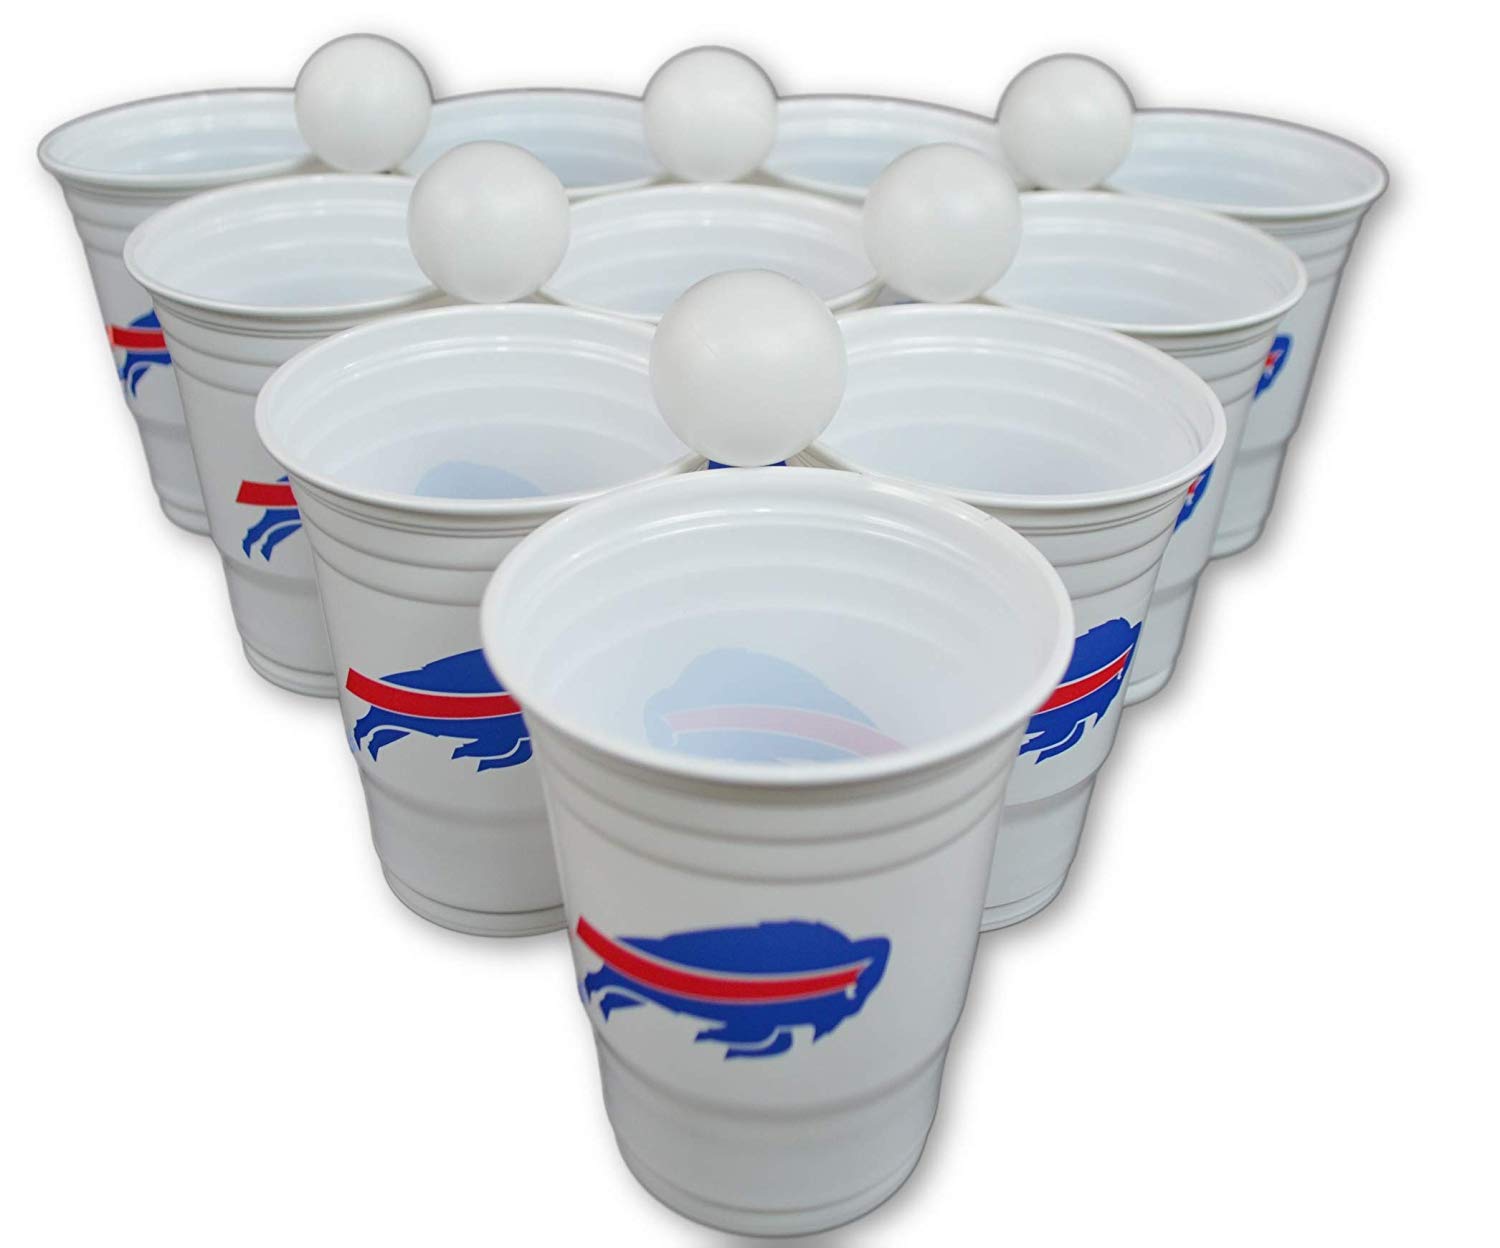 Siskiyou/Sport Mania NFL Fan Shop Beer Pong Set. Rep Your Favorite Team with The Classic Game of Beer Pong at Home or at The Tailgate Party - Comes with 22 Cups and 6 Ping Pong Balls